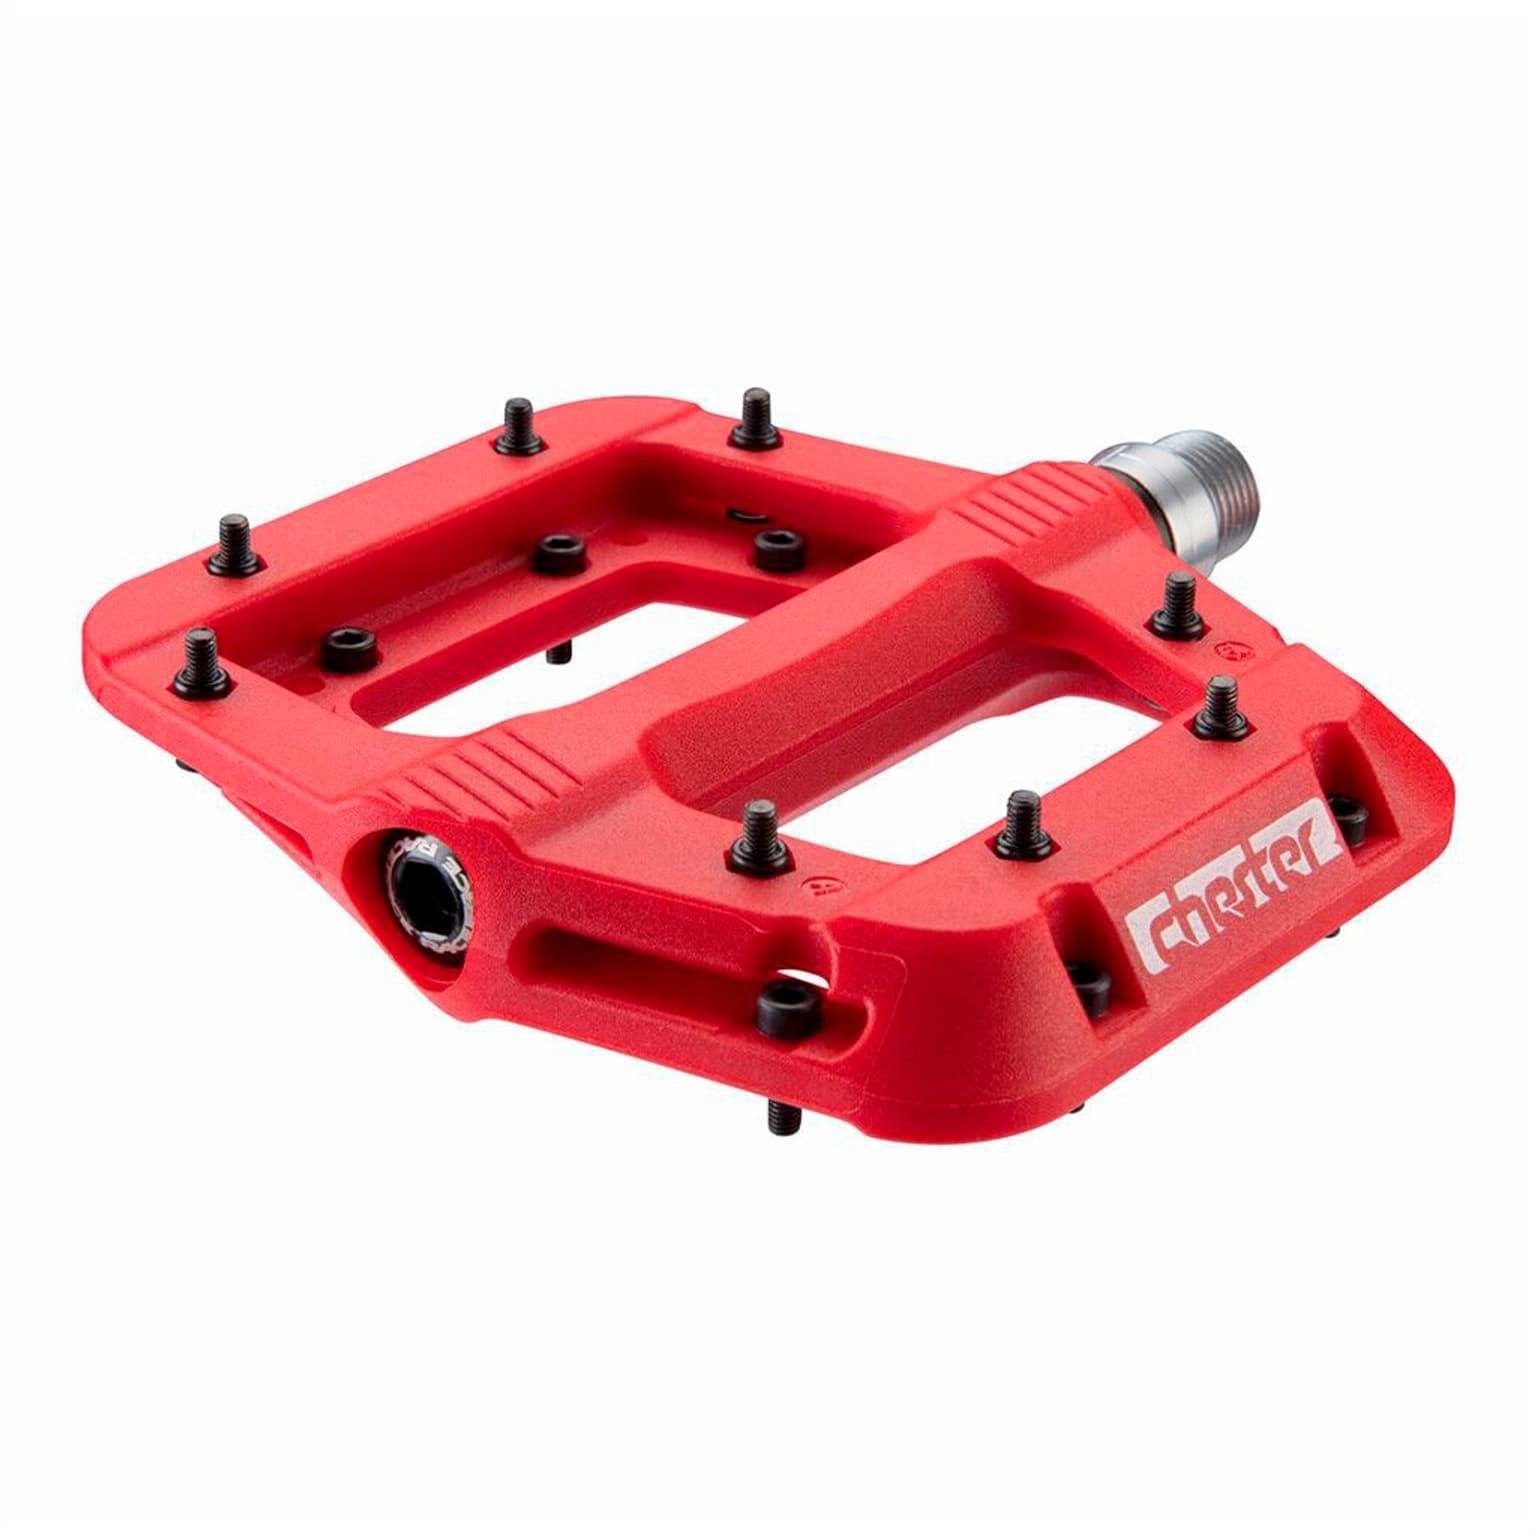 RaceFace RaceFace RaceFace Pedal Chester V2 Velopedale rot 1